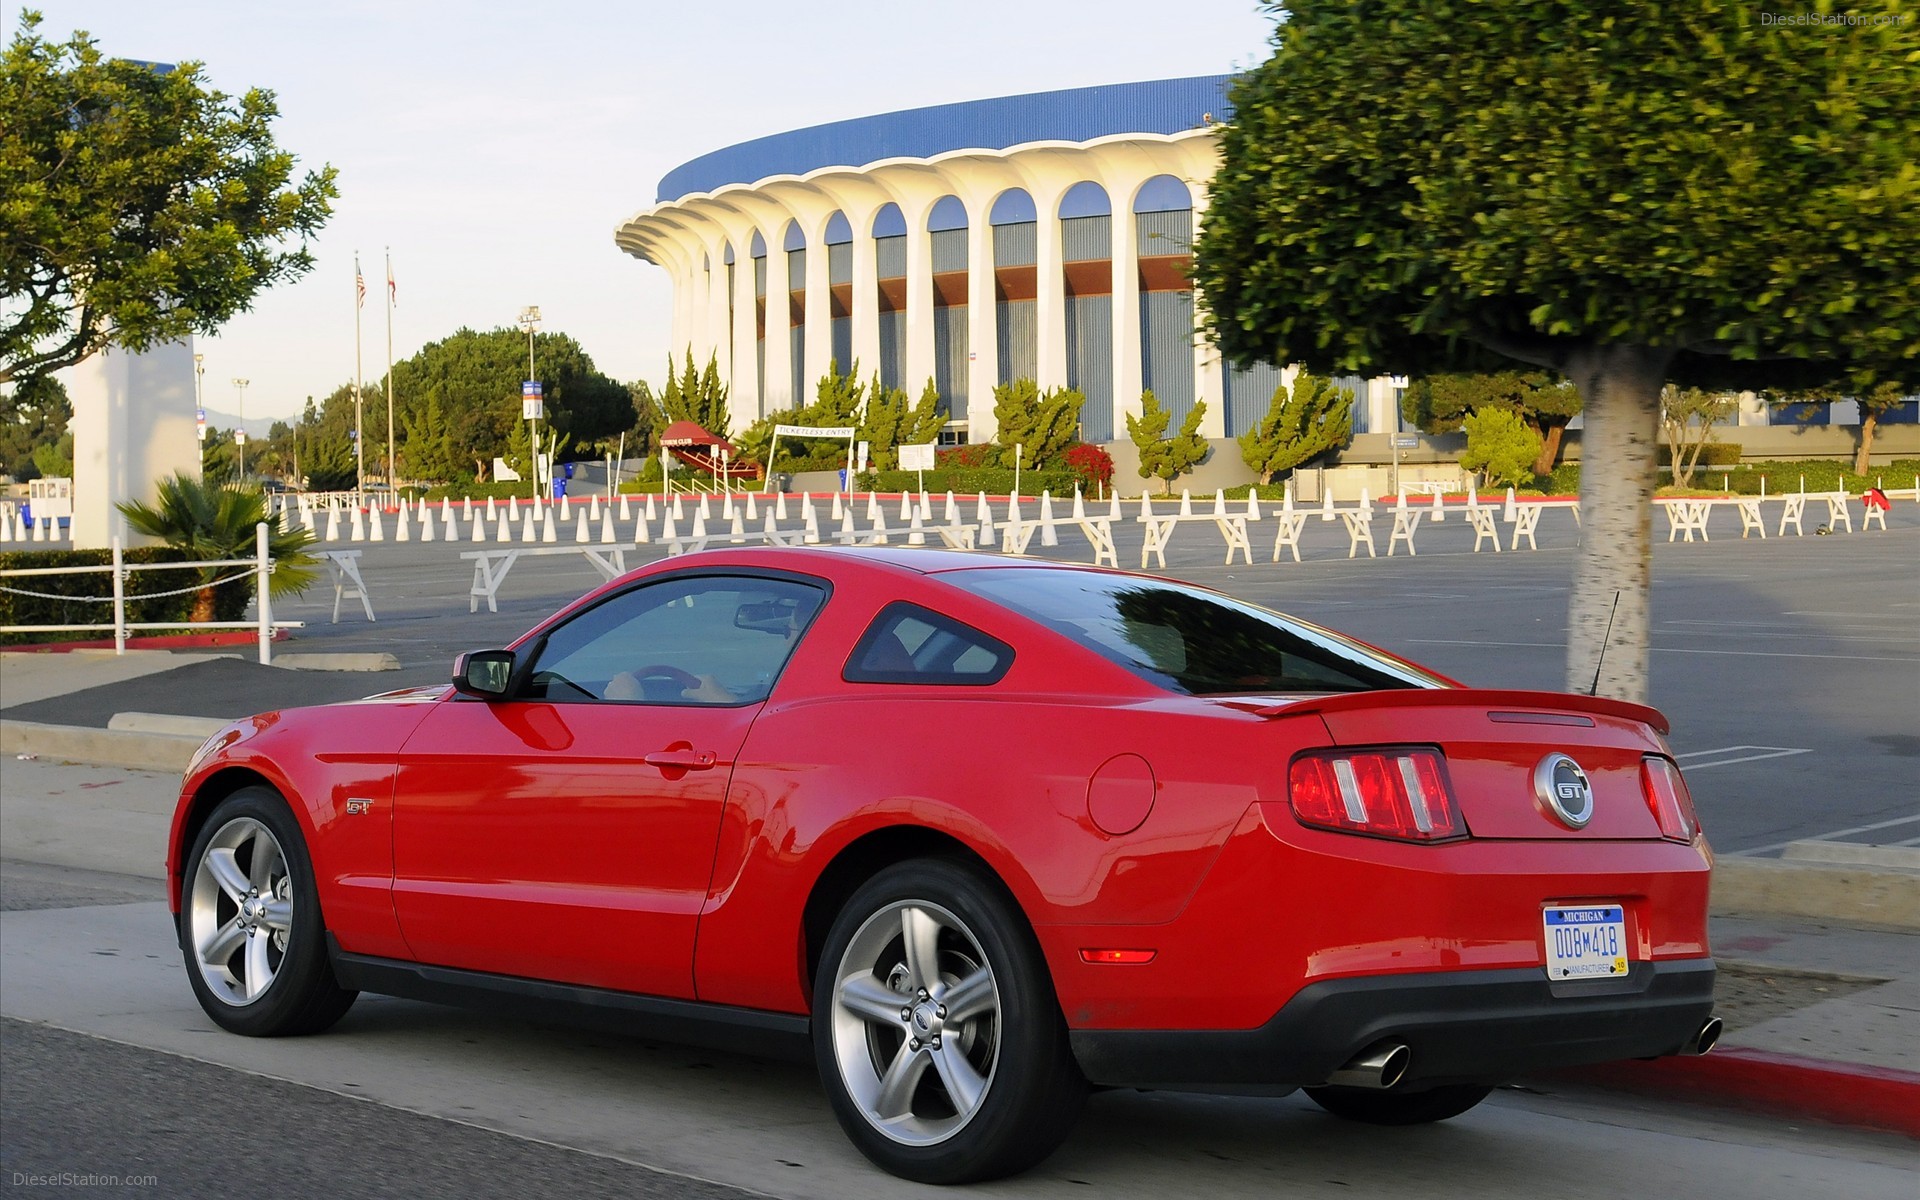 Ford Mustang Gt Widescreen Exotic Car Wallpaper Of